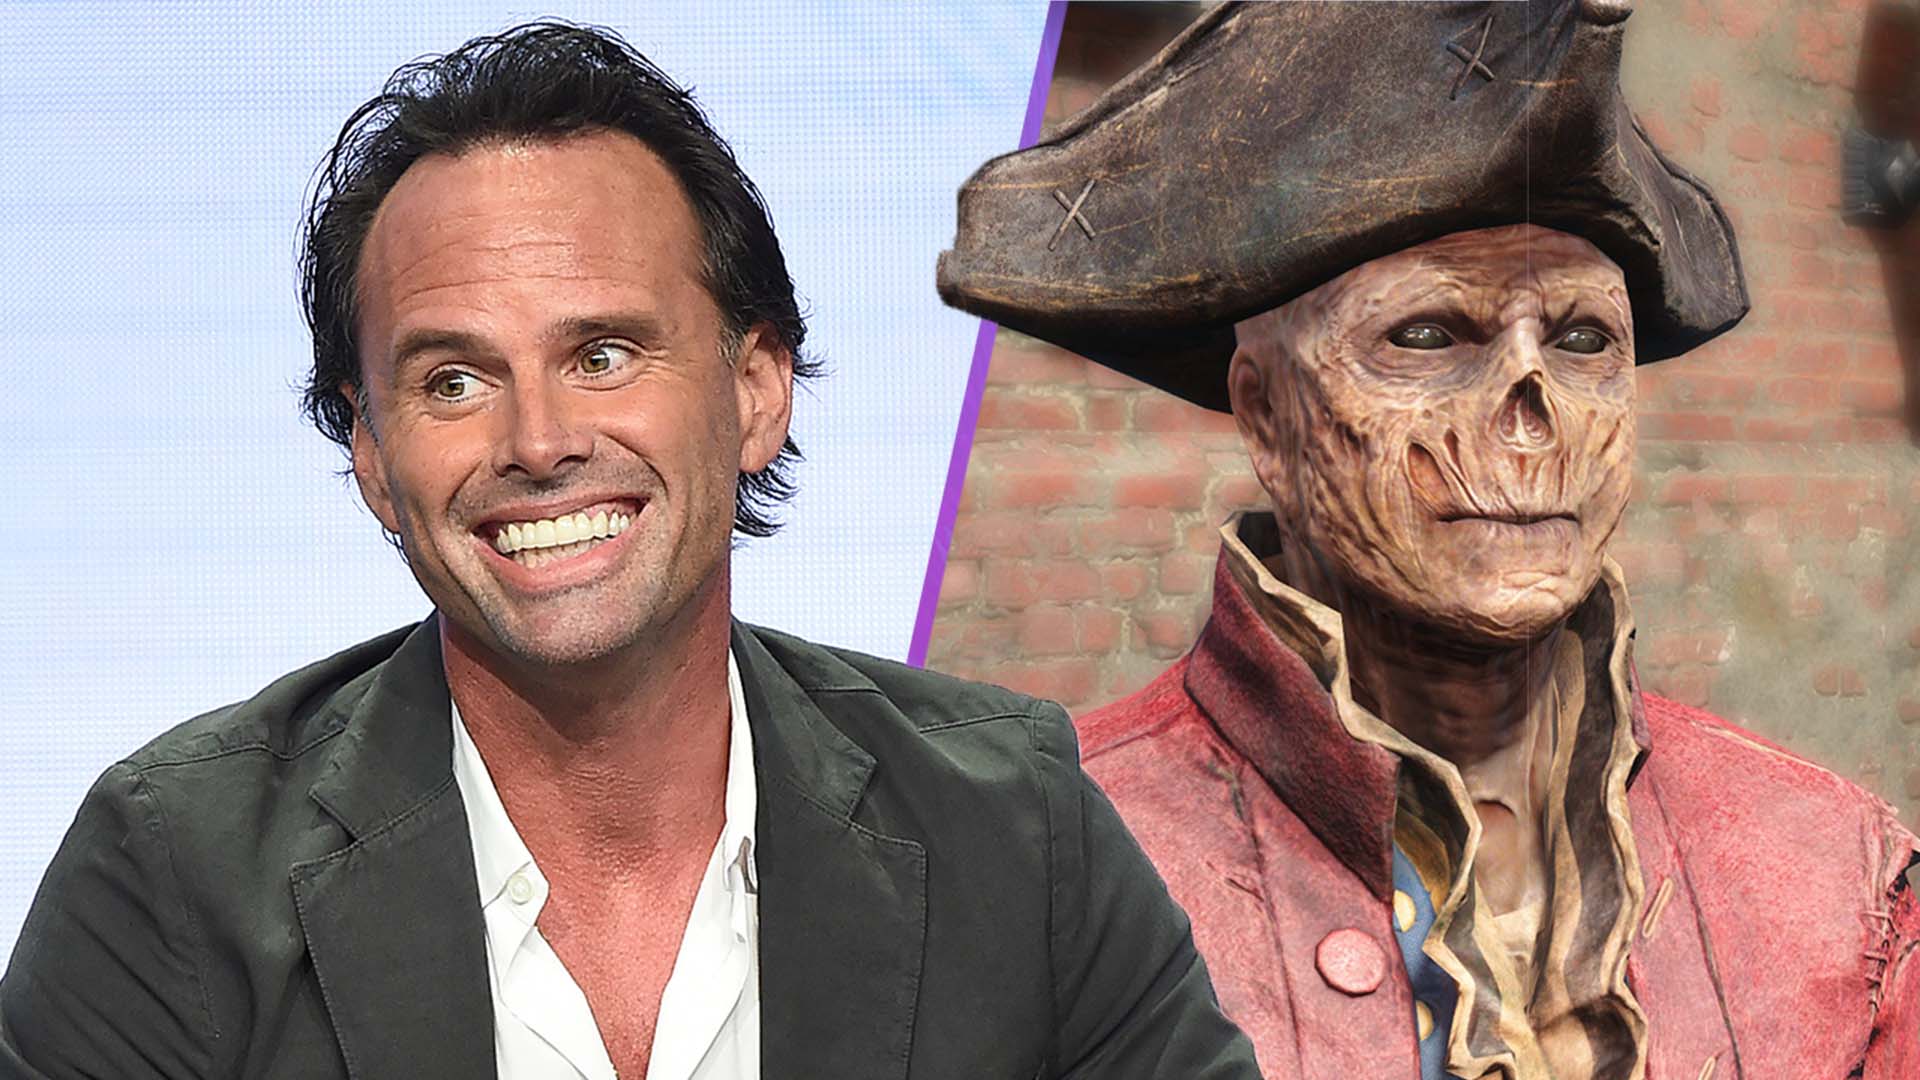 New Ghoul Role Shakes Up Fallout 76: Fans React to Big Changes and Walton Goggins' Role